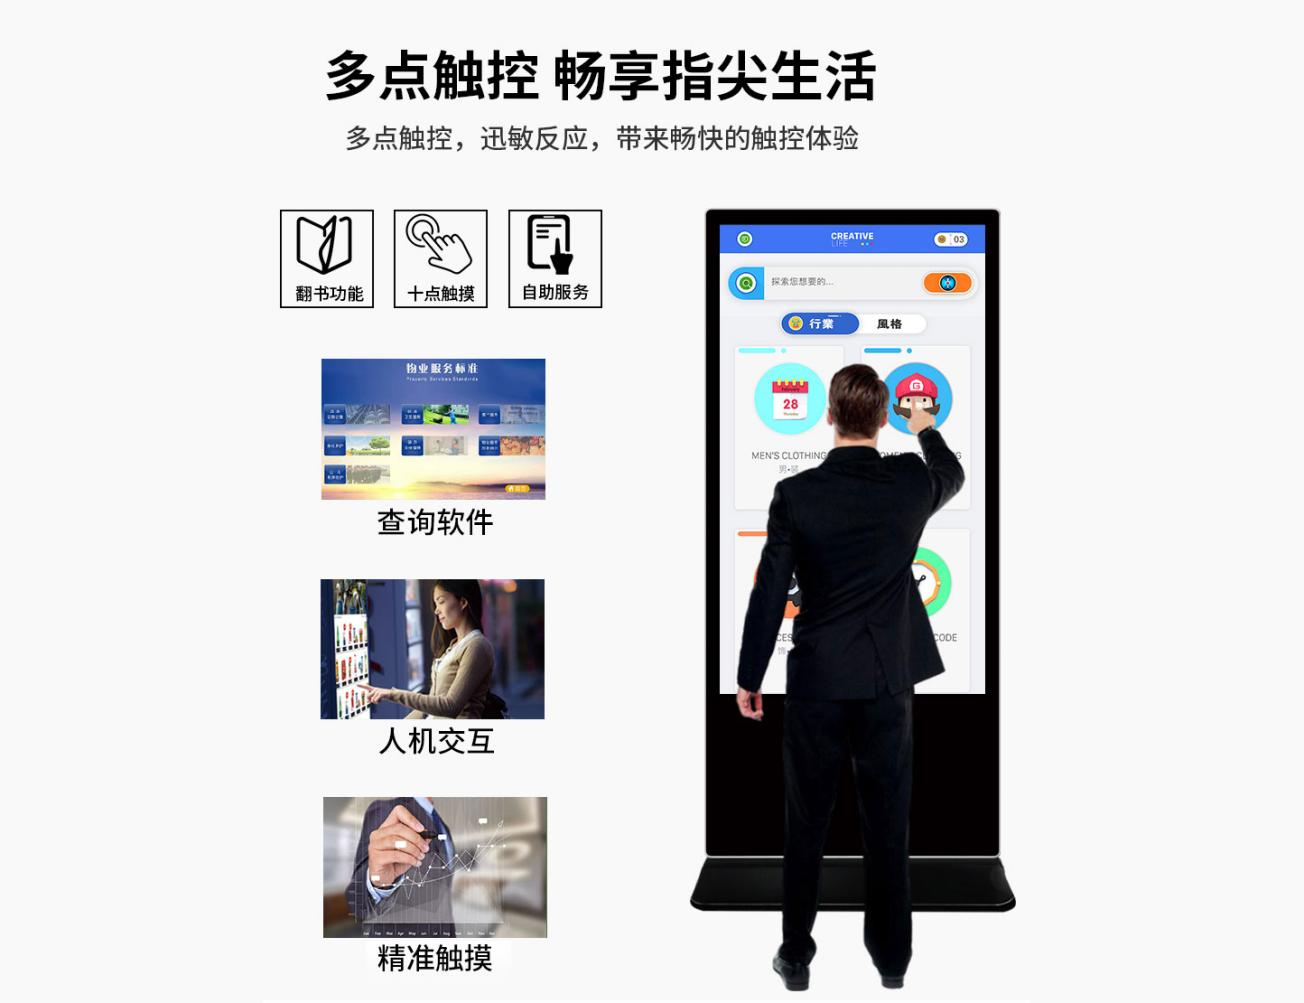 Introduction to the functions of vertical advertising machine (1)